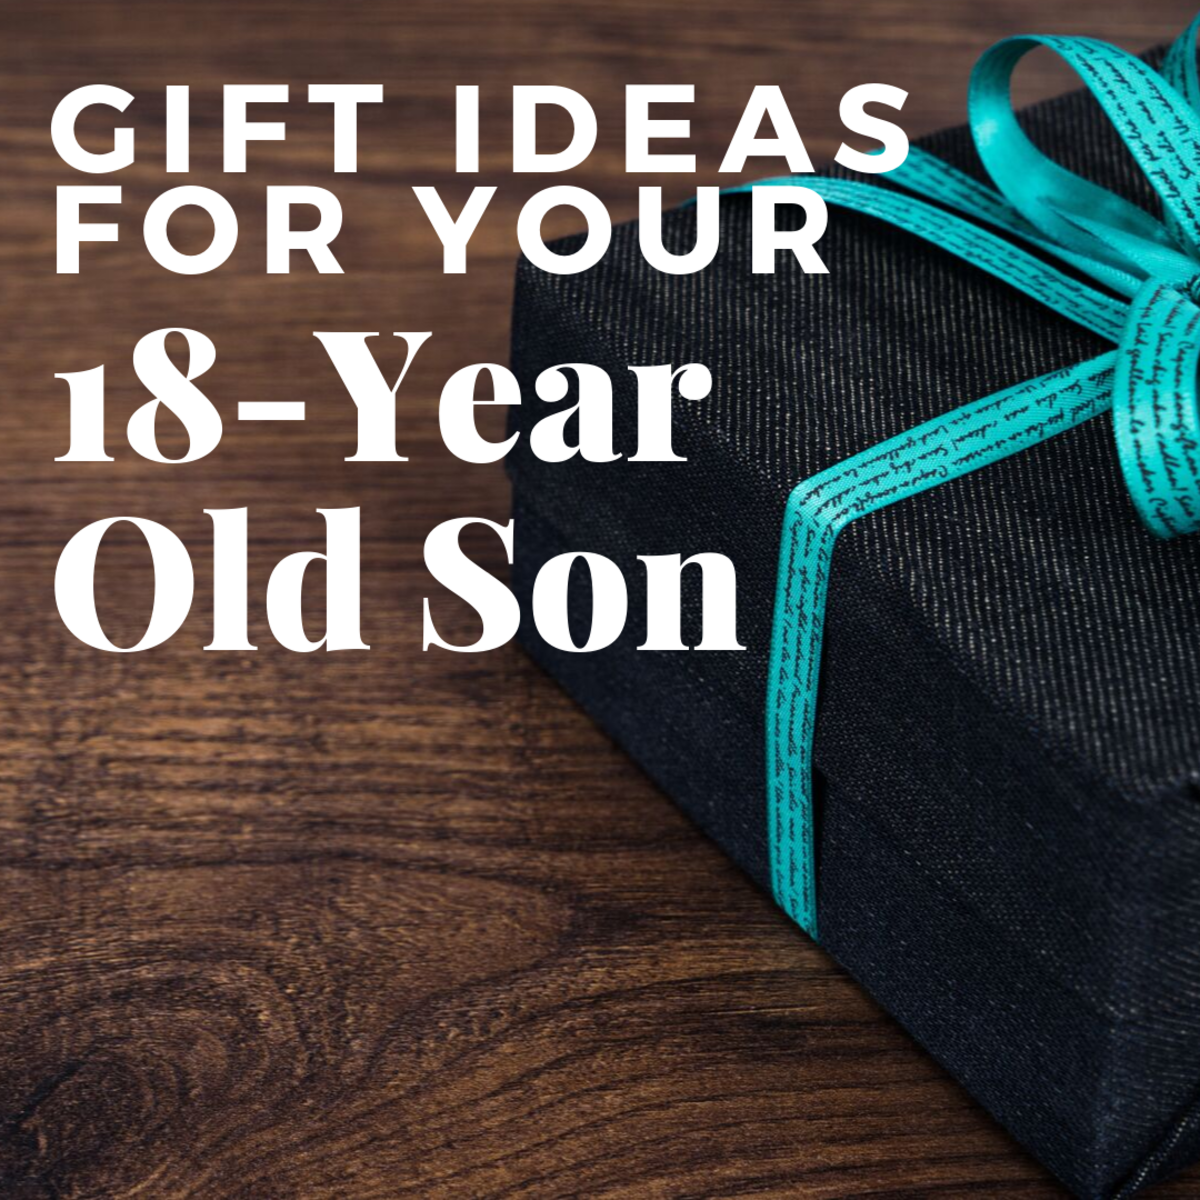 what to give 18 year old boy for birthday